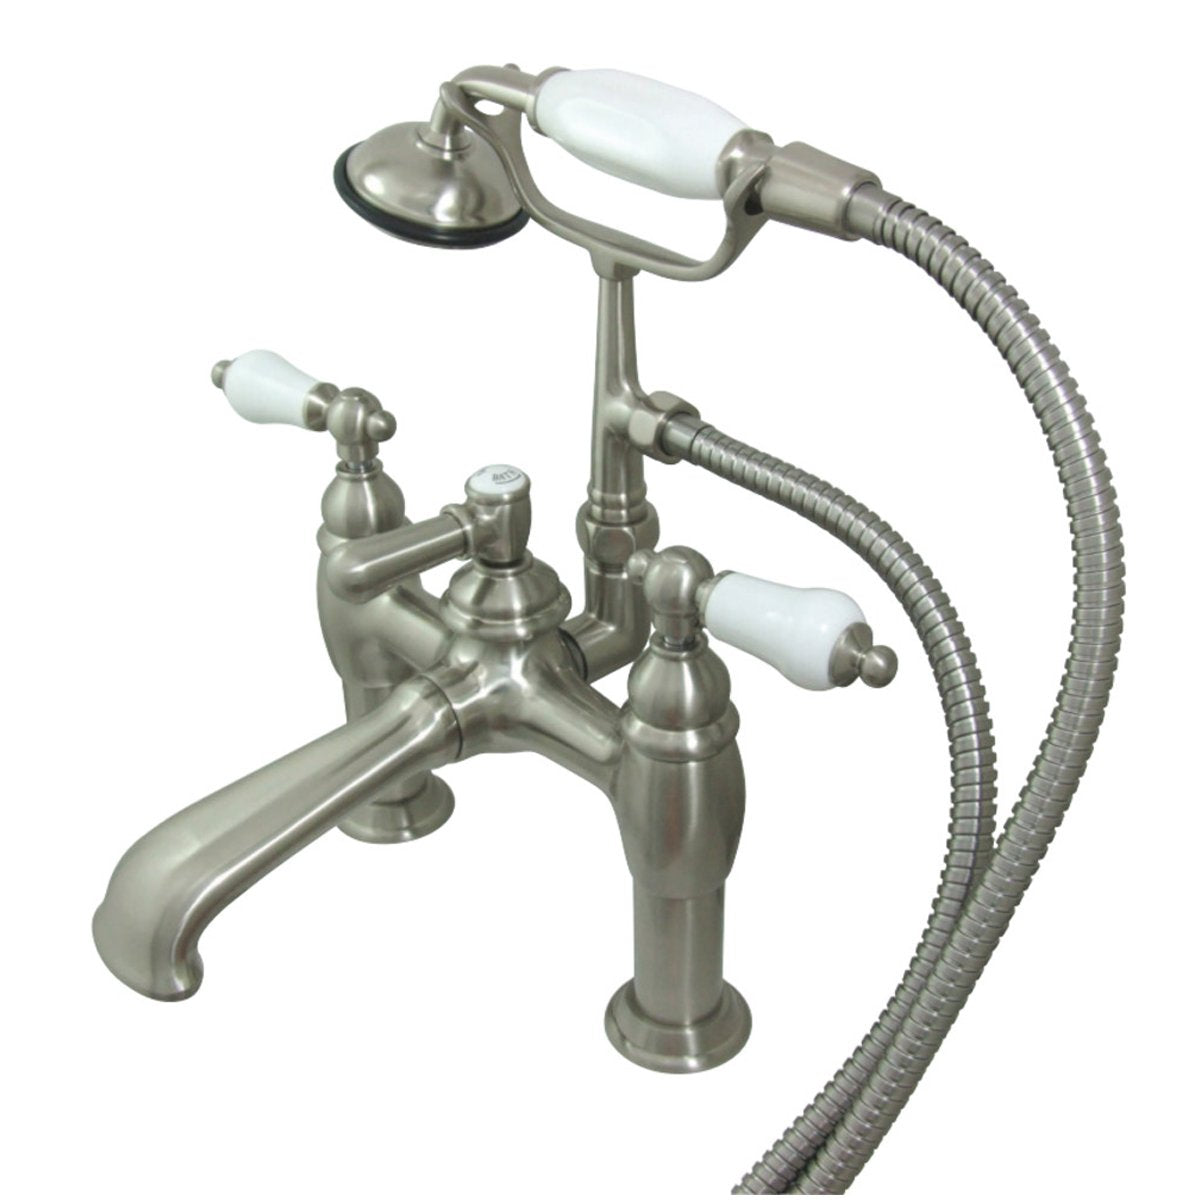 Kingston Brass CC605TX-P Vintage 7-Inch Deck Mount Tub Faucet with Hand Shower